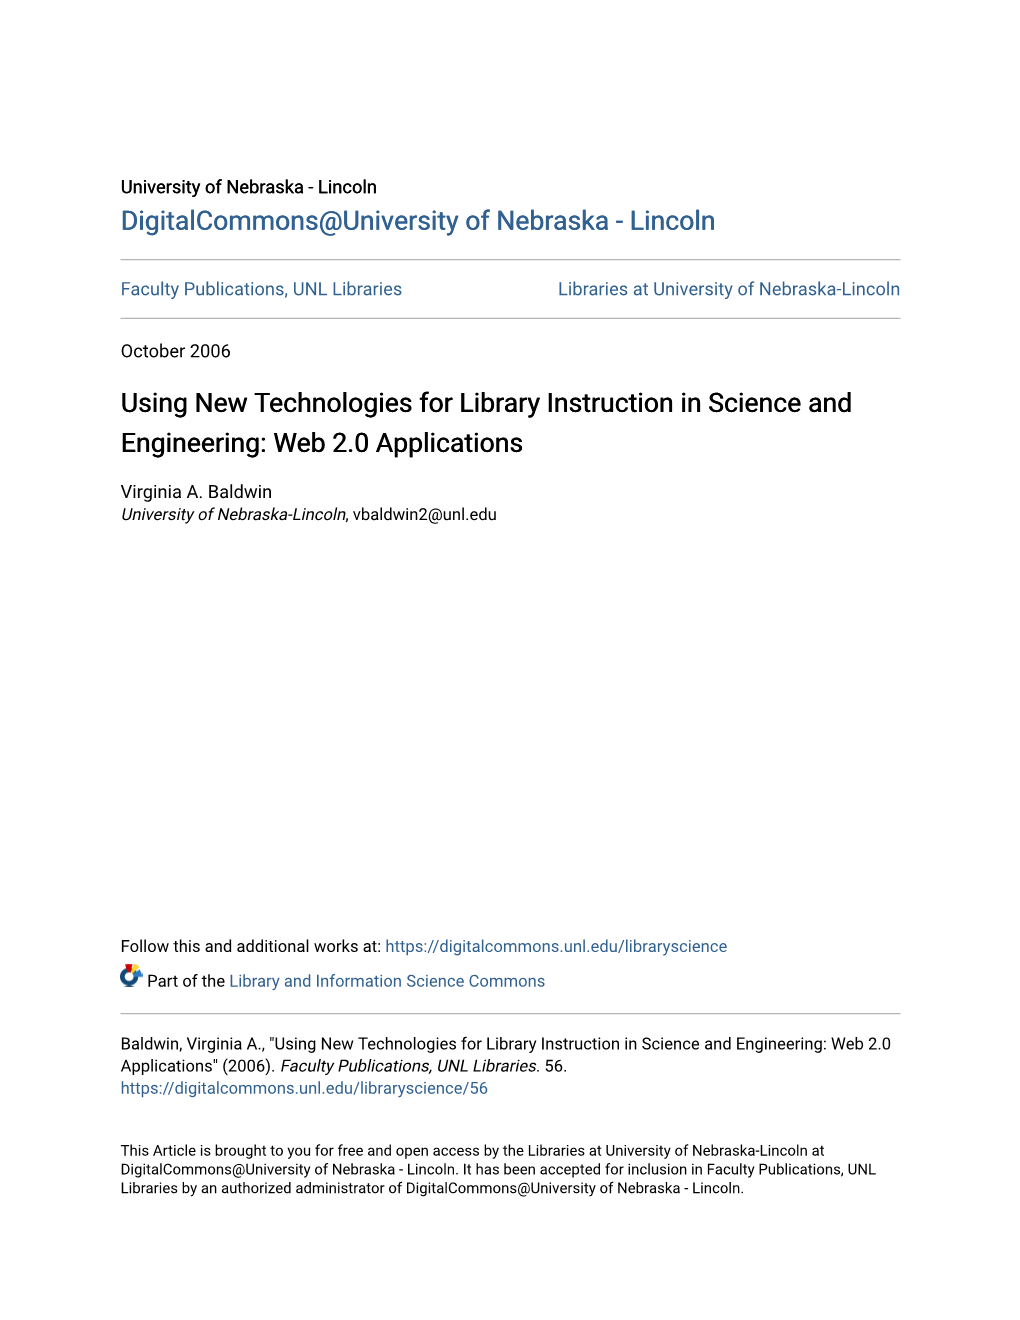 Using New Technologies for Library Instruction in Science and Engineering: Web 2.0 Applications